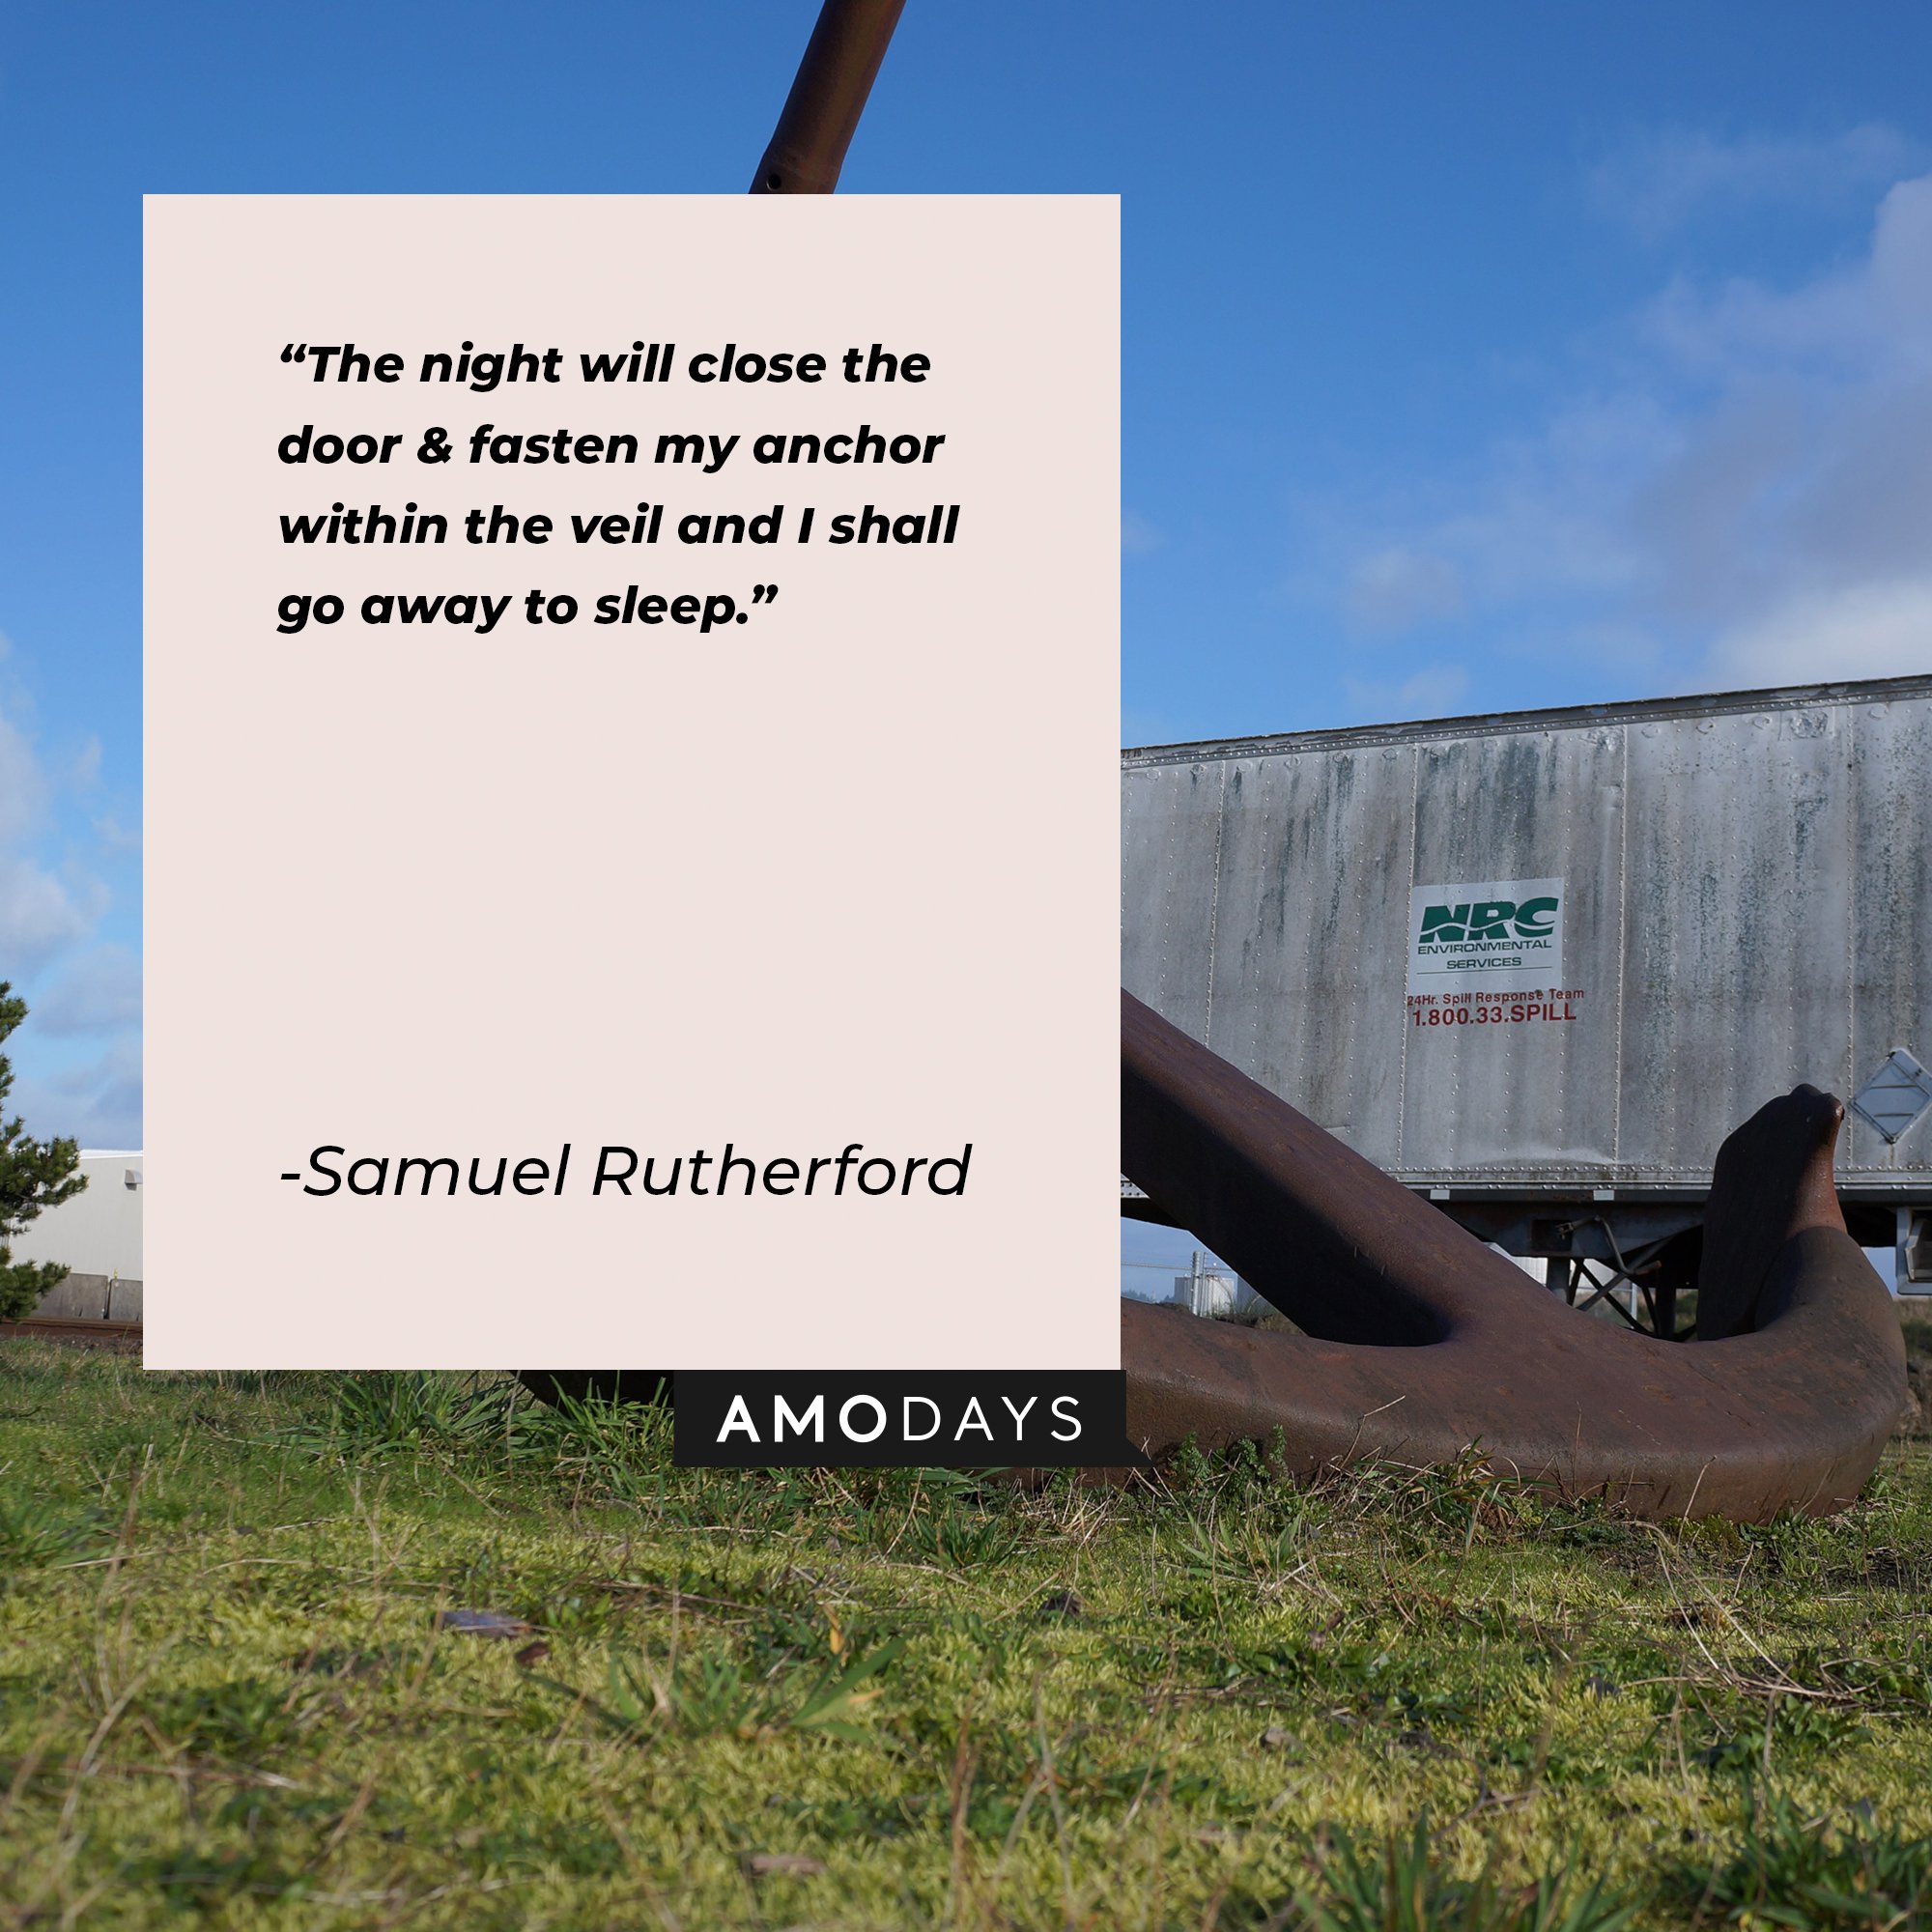 Samuel Rutherford's quote: "The night will close the door & fasten my anchor within the veil and I shall go away to sleep." | Image: AmoDays